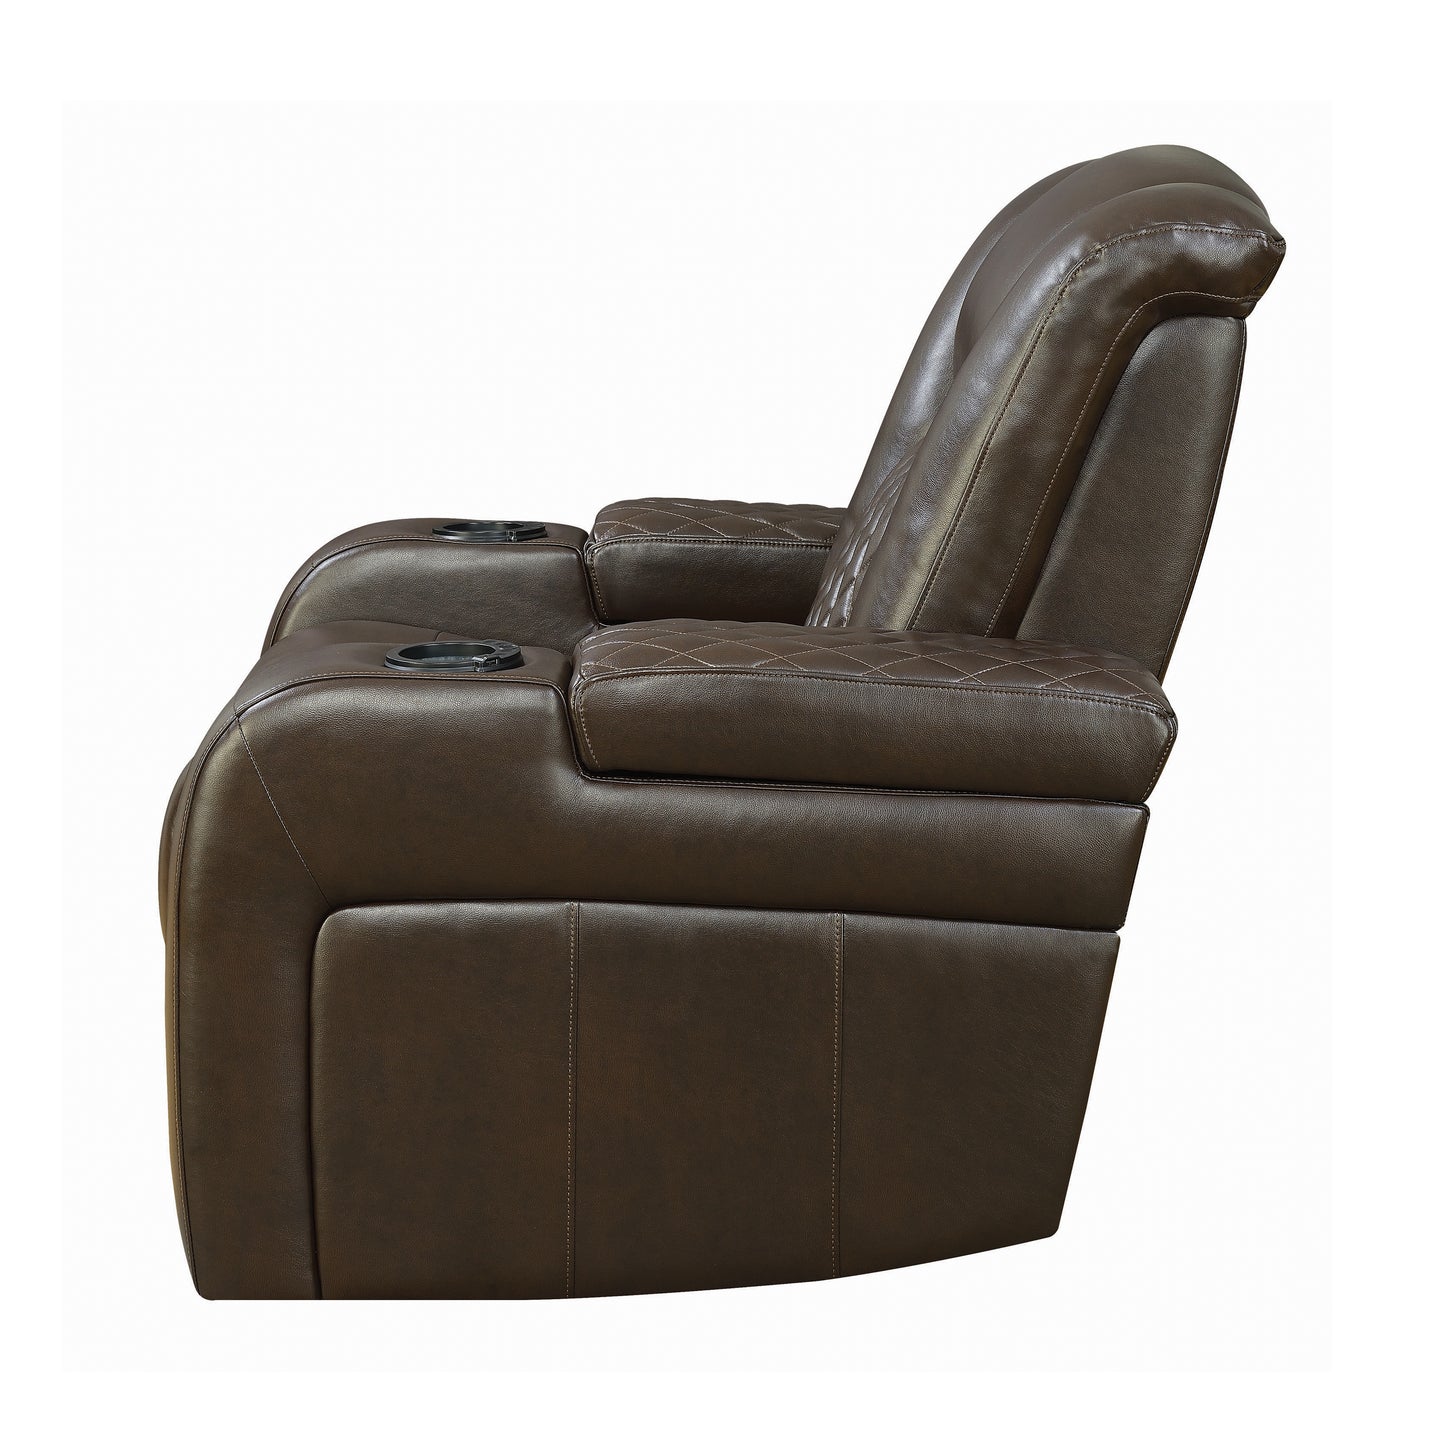 Delangelo Power^2 Sofa with Drop-down Table Brown